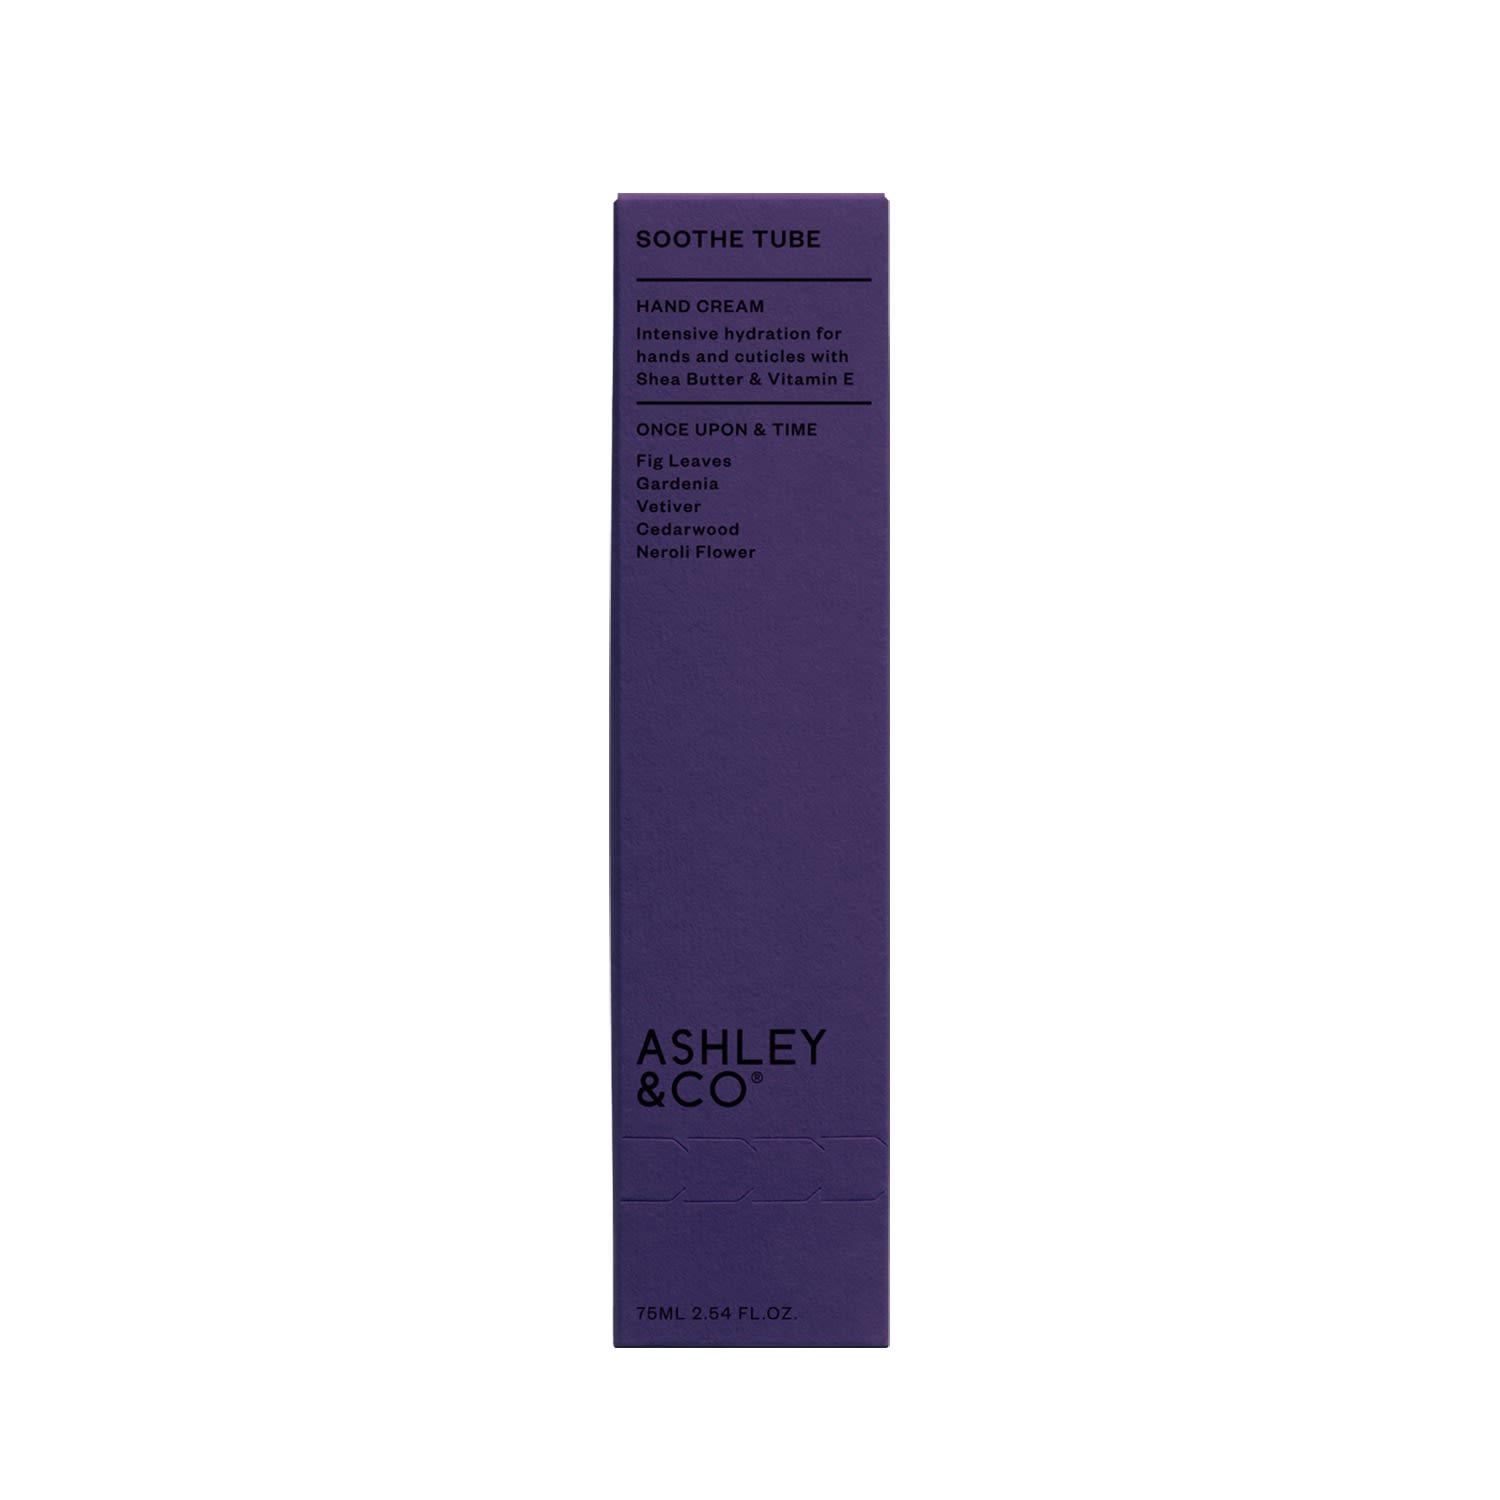 Soothe Tube Hand Cream Once Upon & Time Ashley & Co